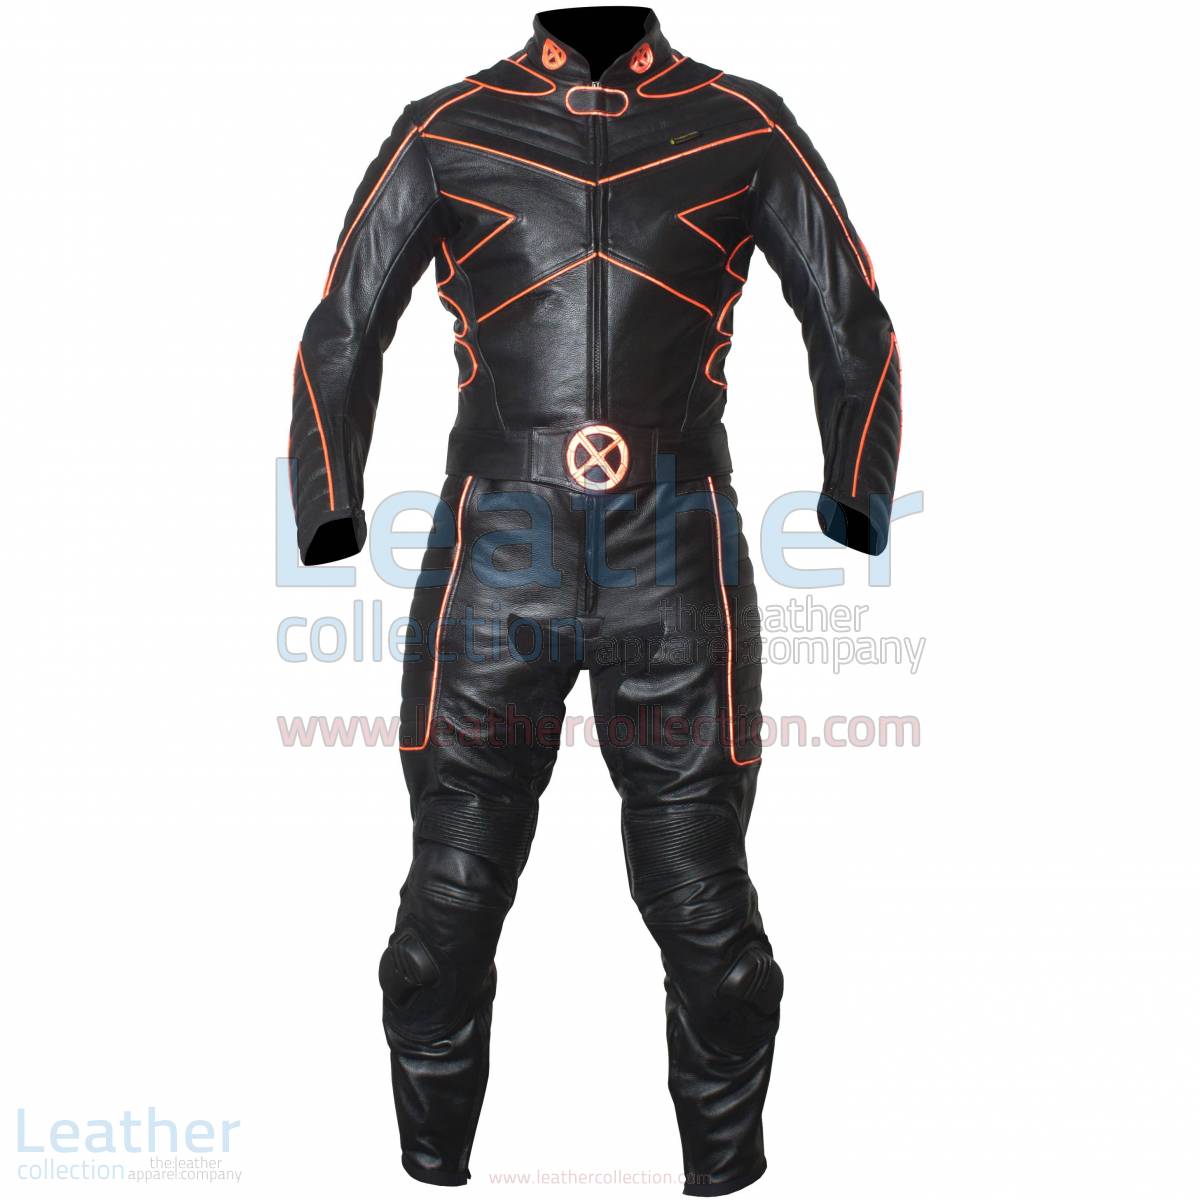 X-MEN Motorcycle Racing Leather Suit with Orange Piping